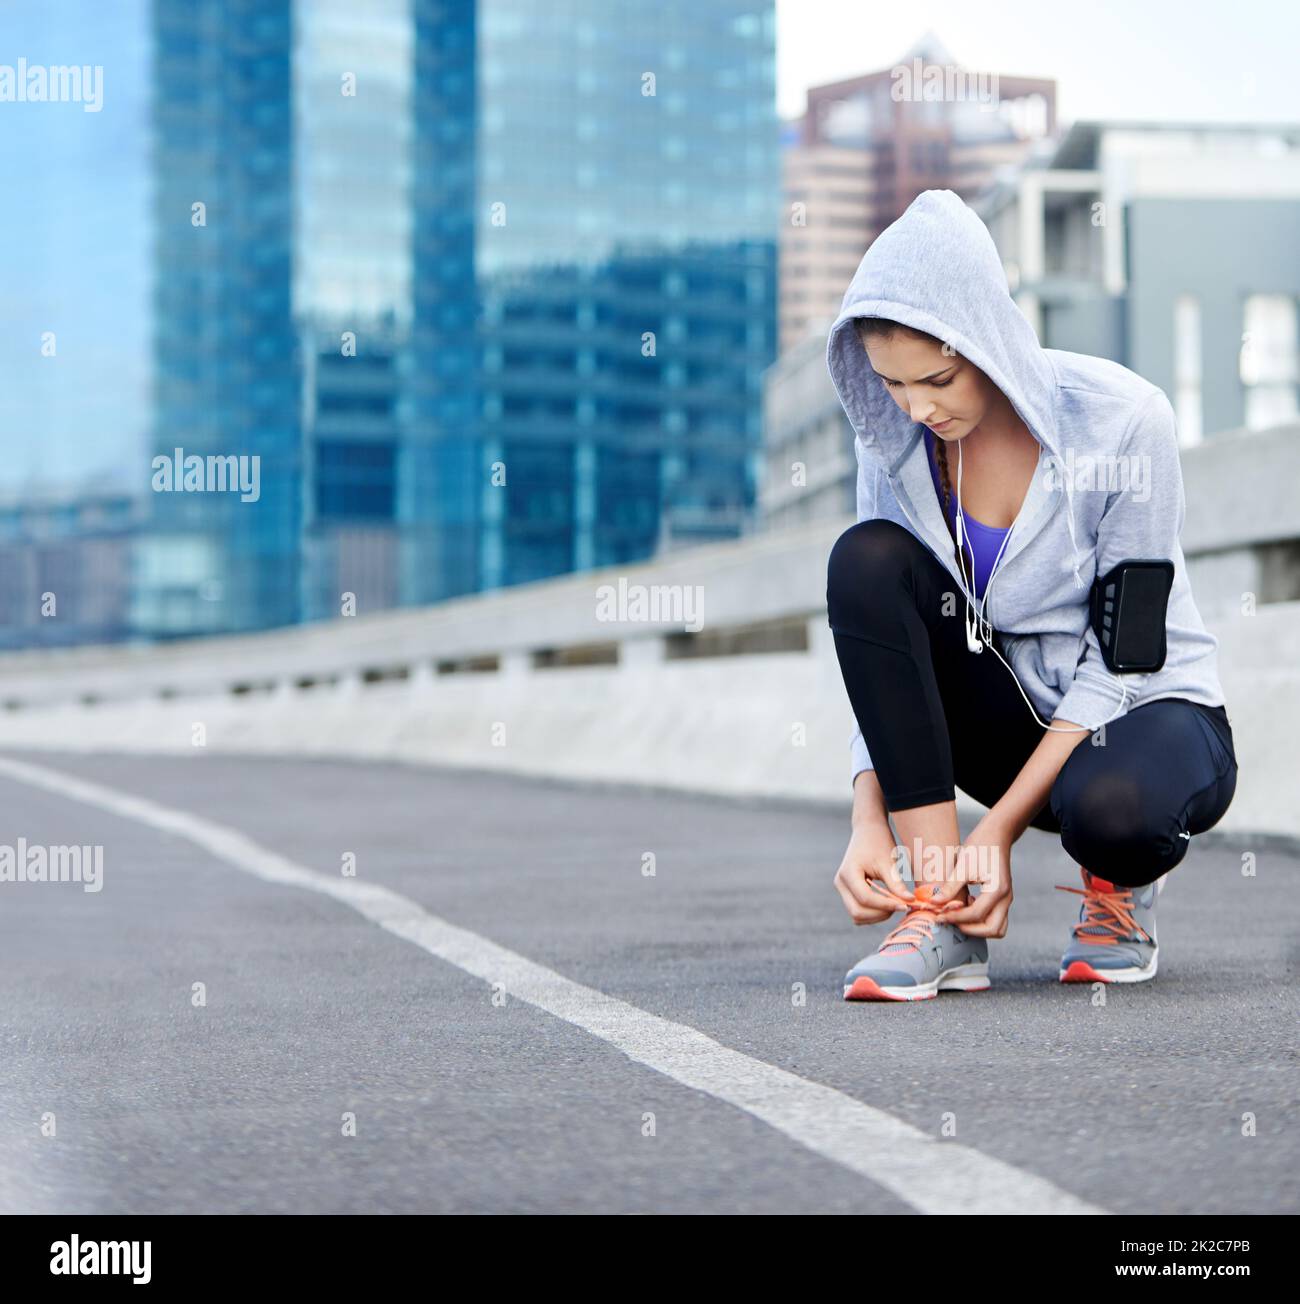 Almost time for these feet to move. Shot of a young female jogger tying up her shoes before a run through the city. Stock Photo